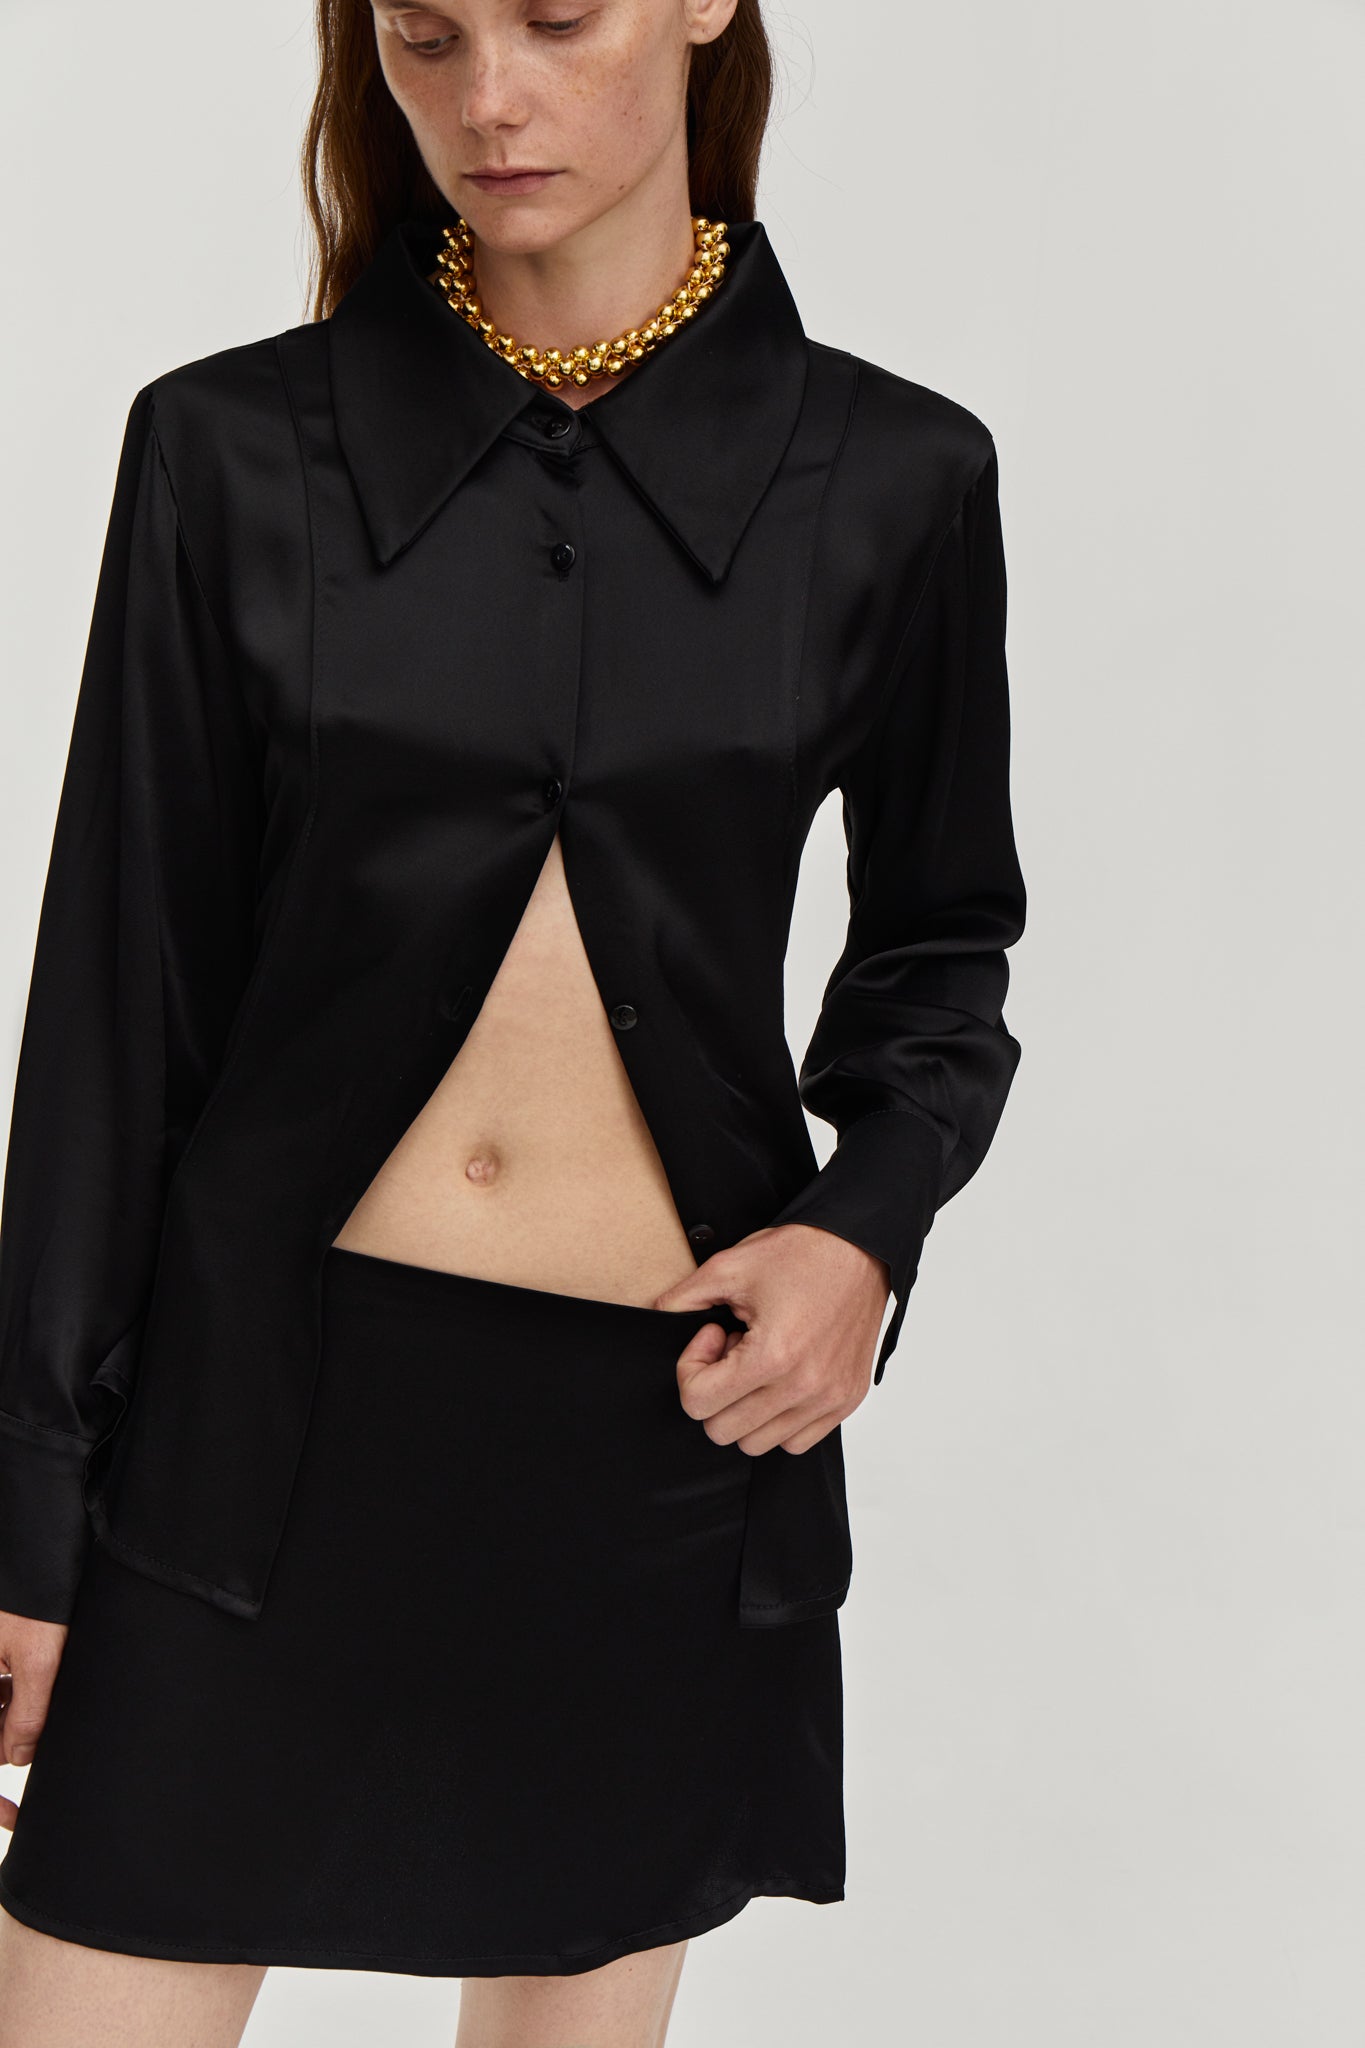 Silky viscose suit with mini low waist skirt and Fitted-waist silky blouse in Black color from FORMA brand